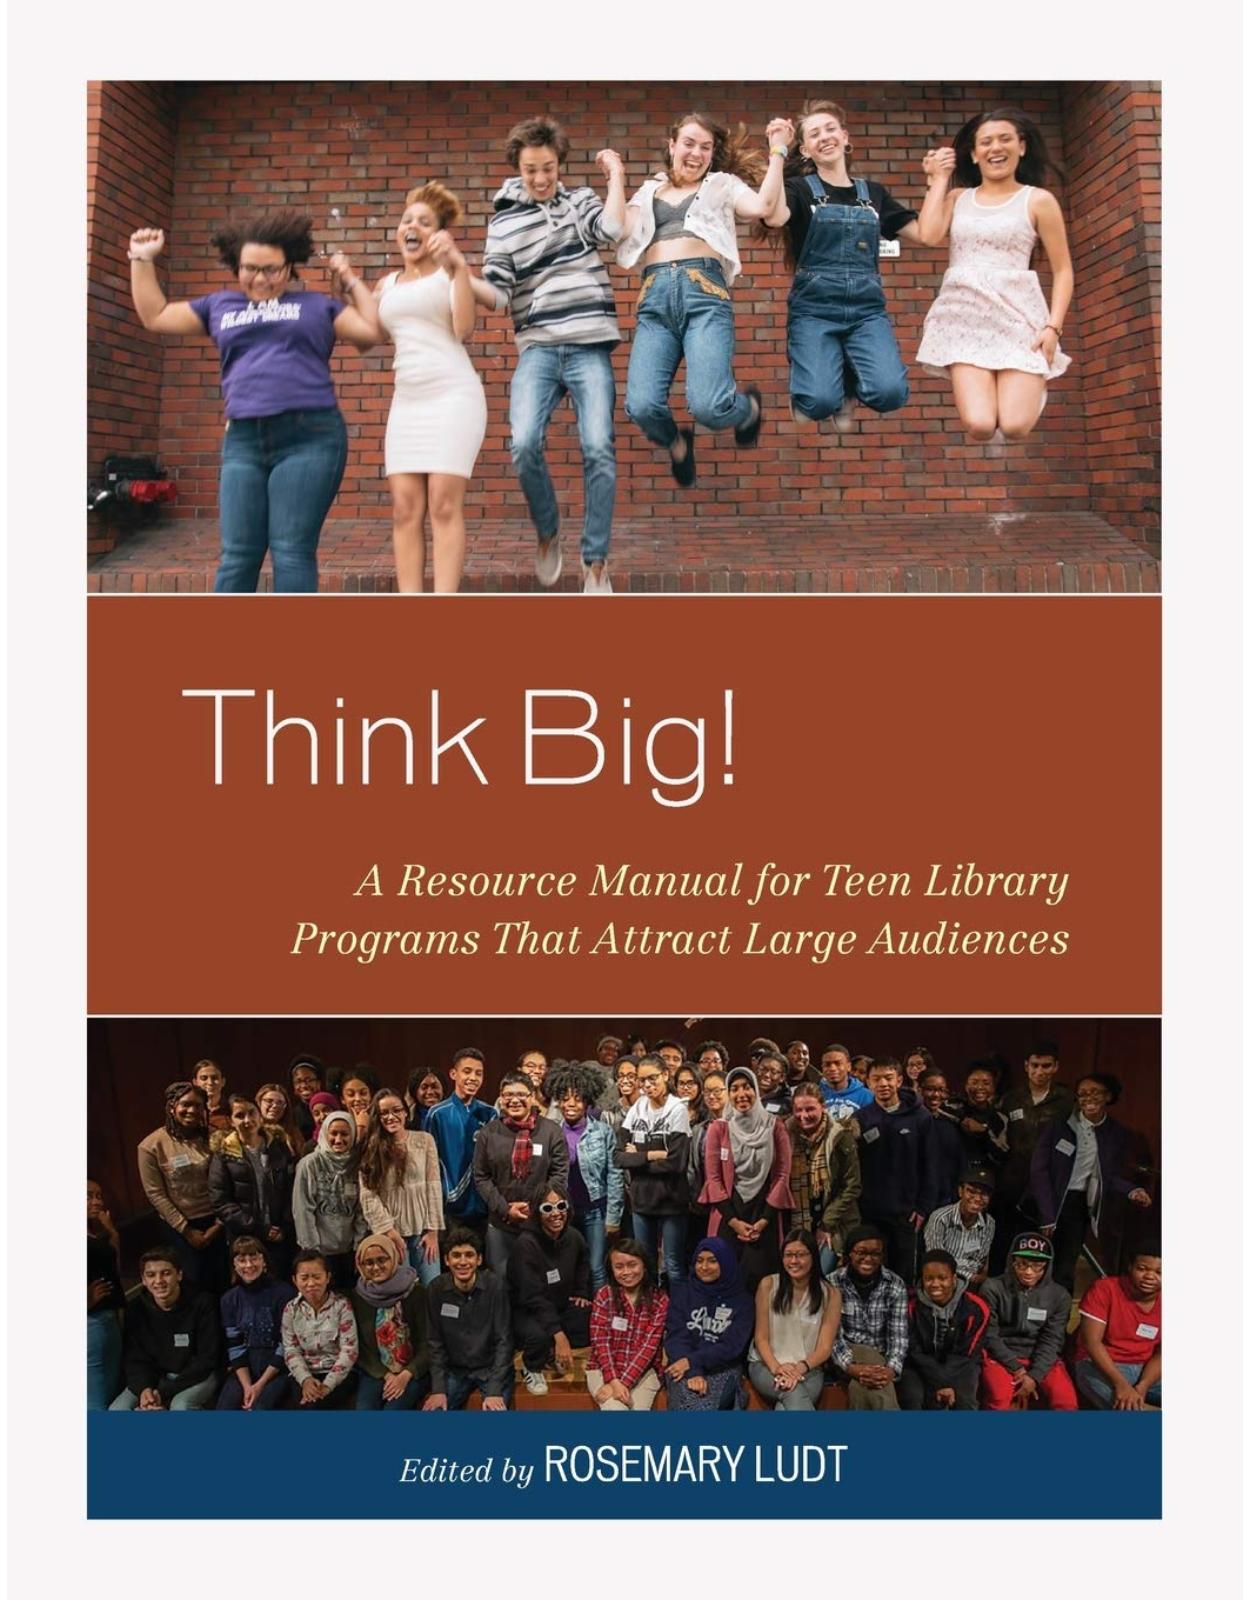 Think Big!: A Resource Manual for Teen Library Programs That Attract Large Audiences